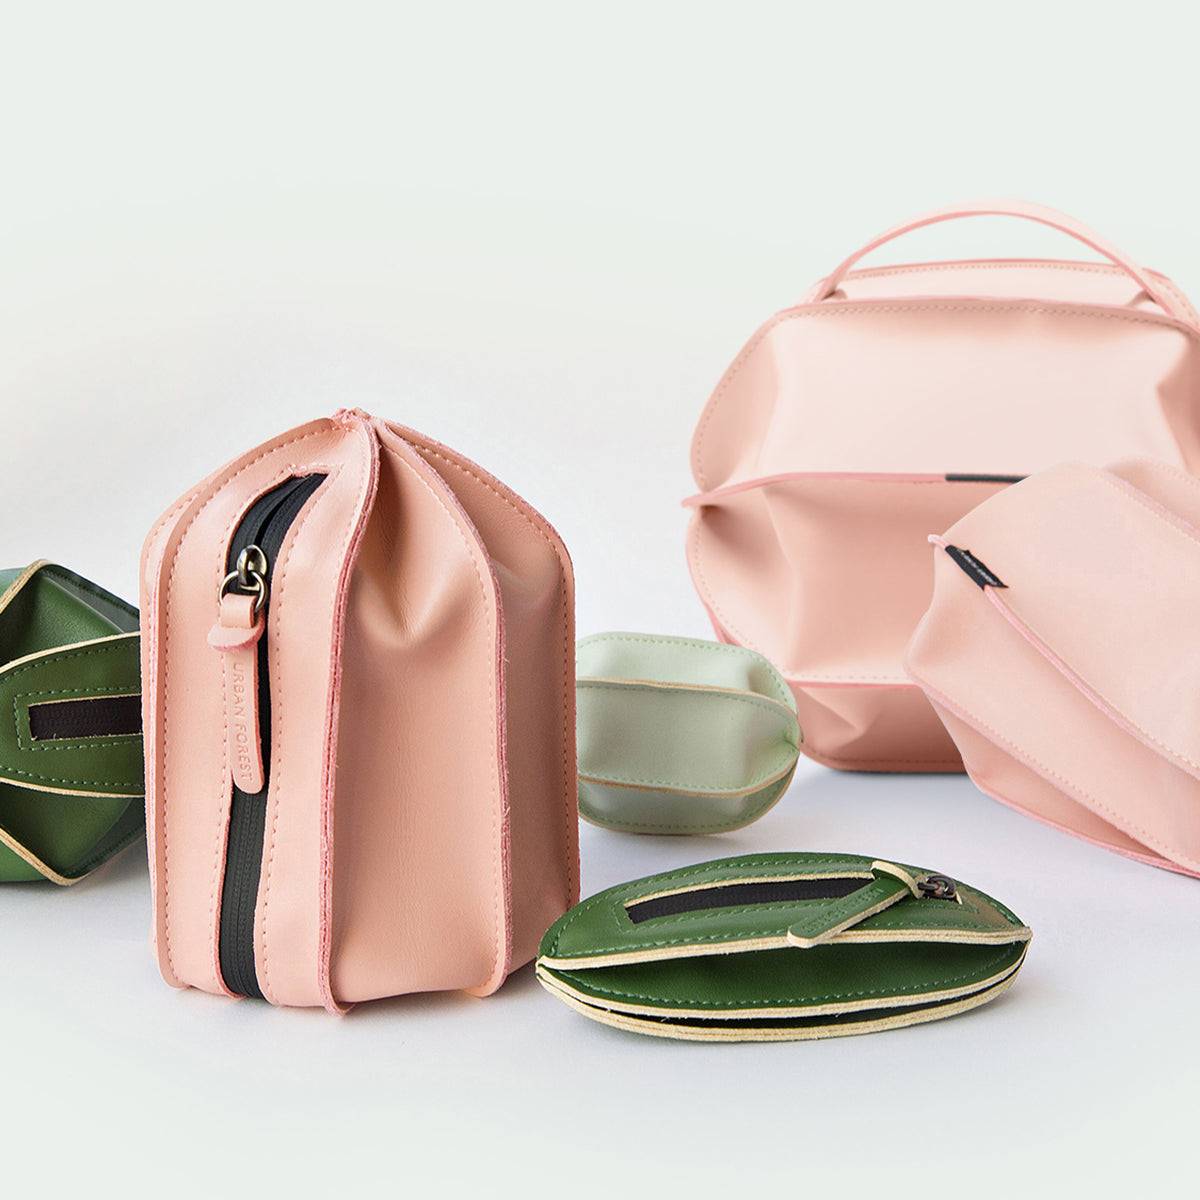 Urban Forest CACTUS series Toiletry bags stands as the ultimate choice for those seeking both functionality and elegance